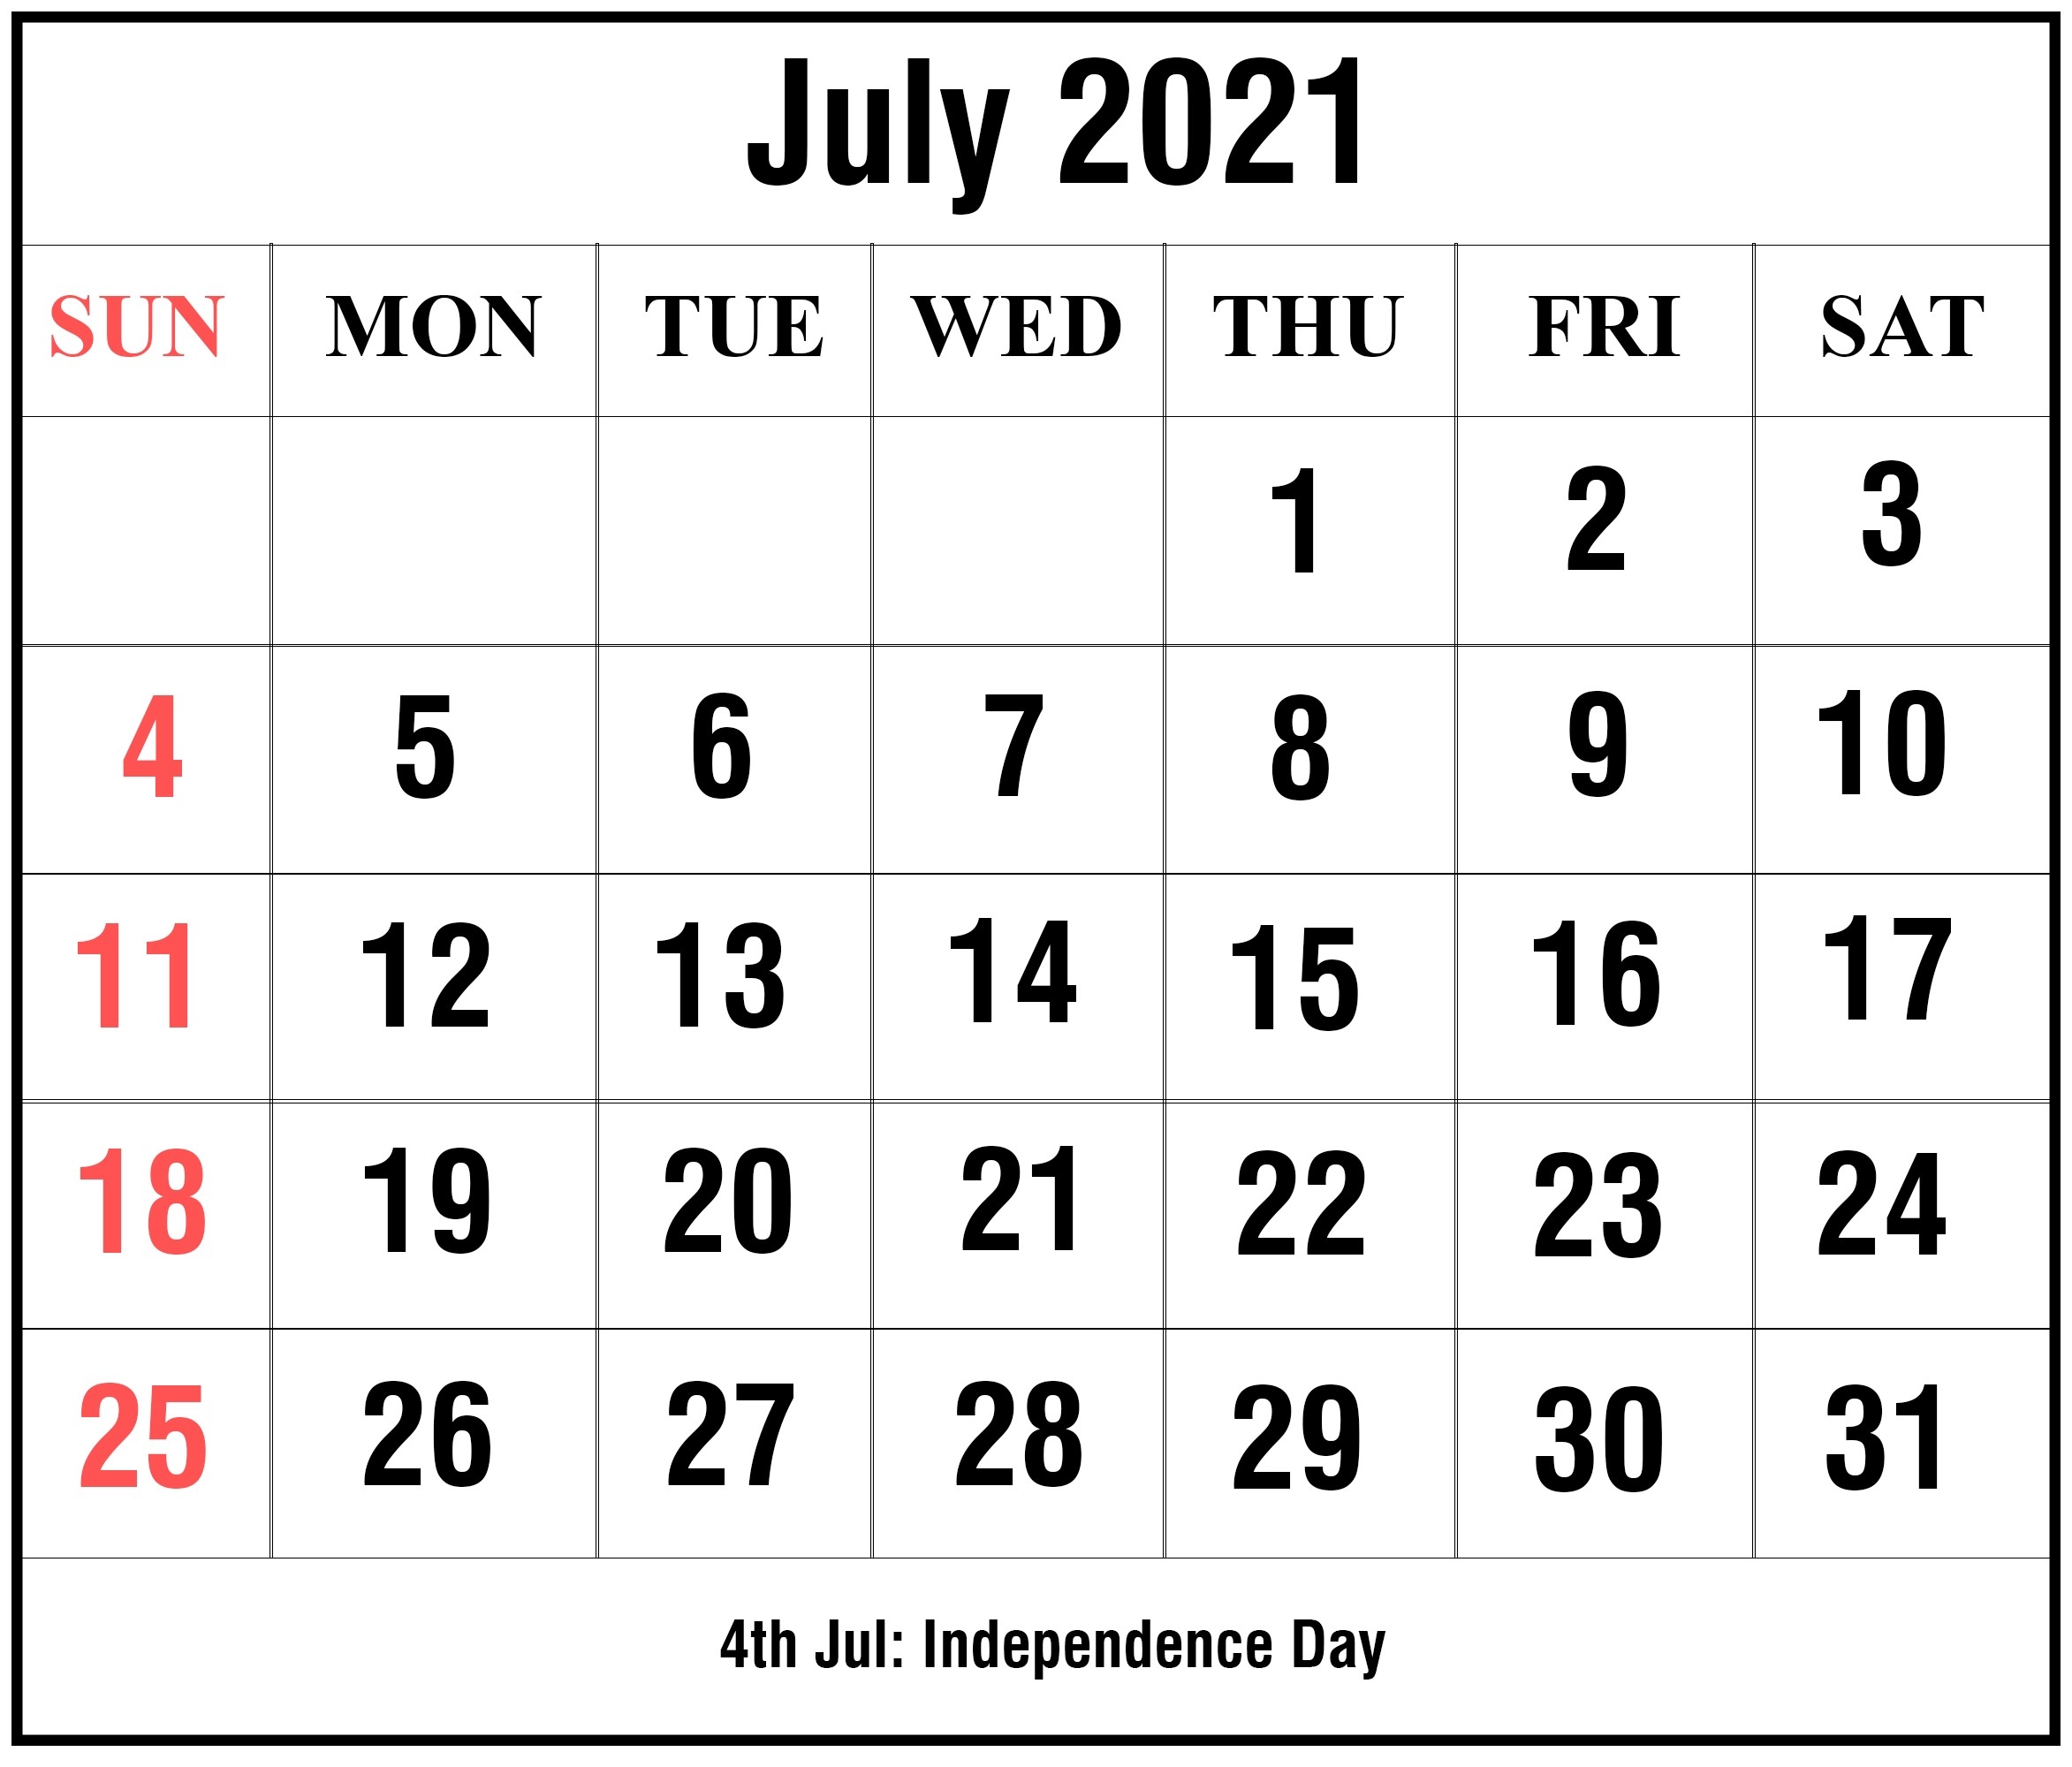 Free Editable Calendar 2021 July For All Users | Free Printable Calendar Monthly July 2021 Calendar Portrait